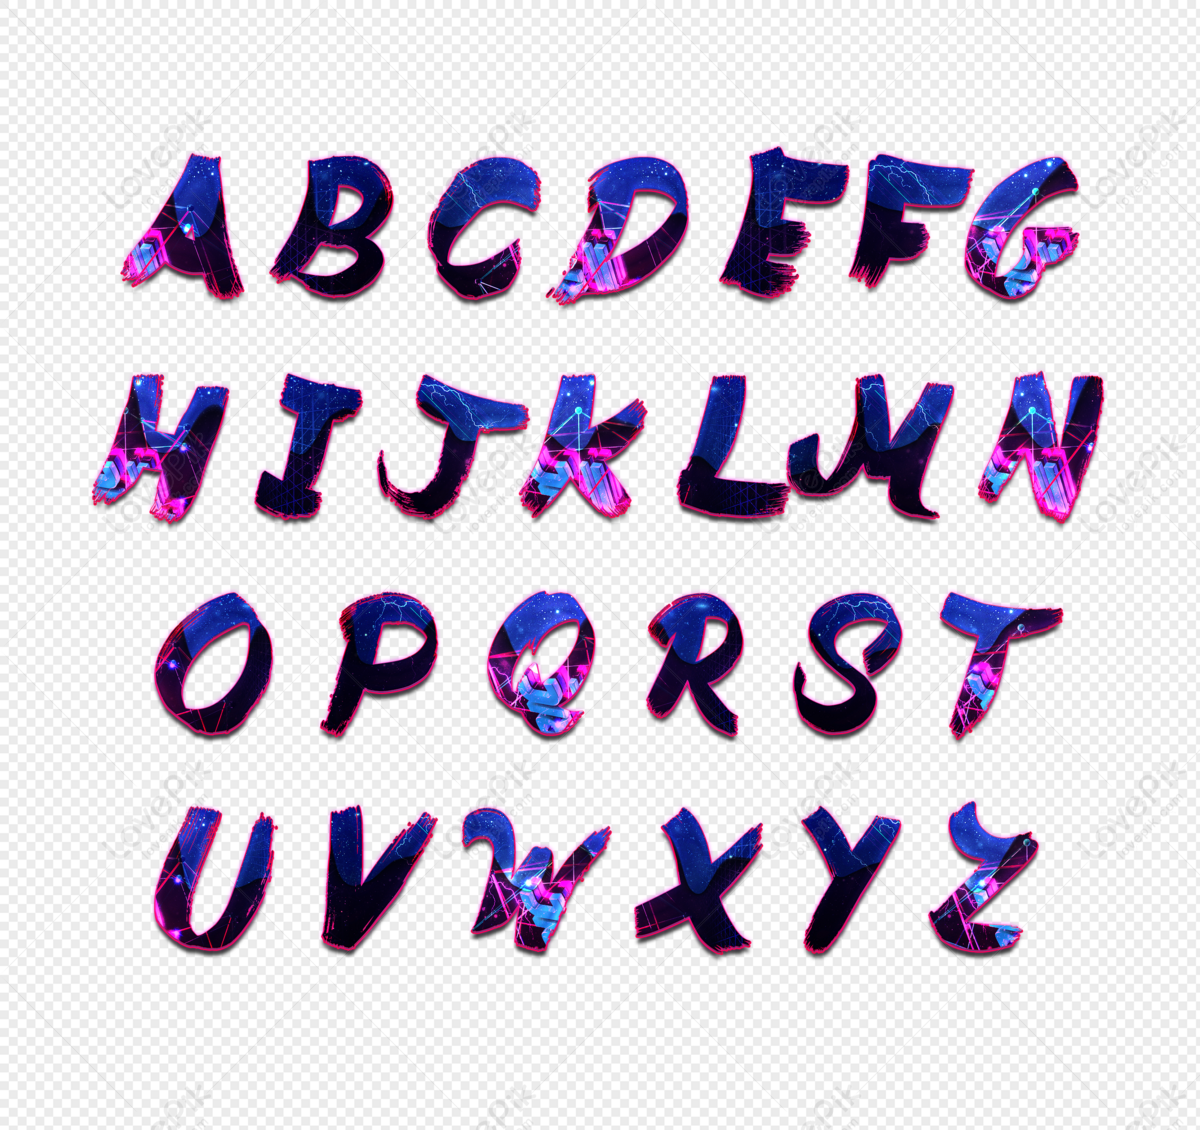 26 English Alphabet Design PNG Transparent Background And Clipart Image For  Free Download - Lovepik | 400794680